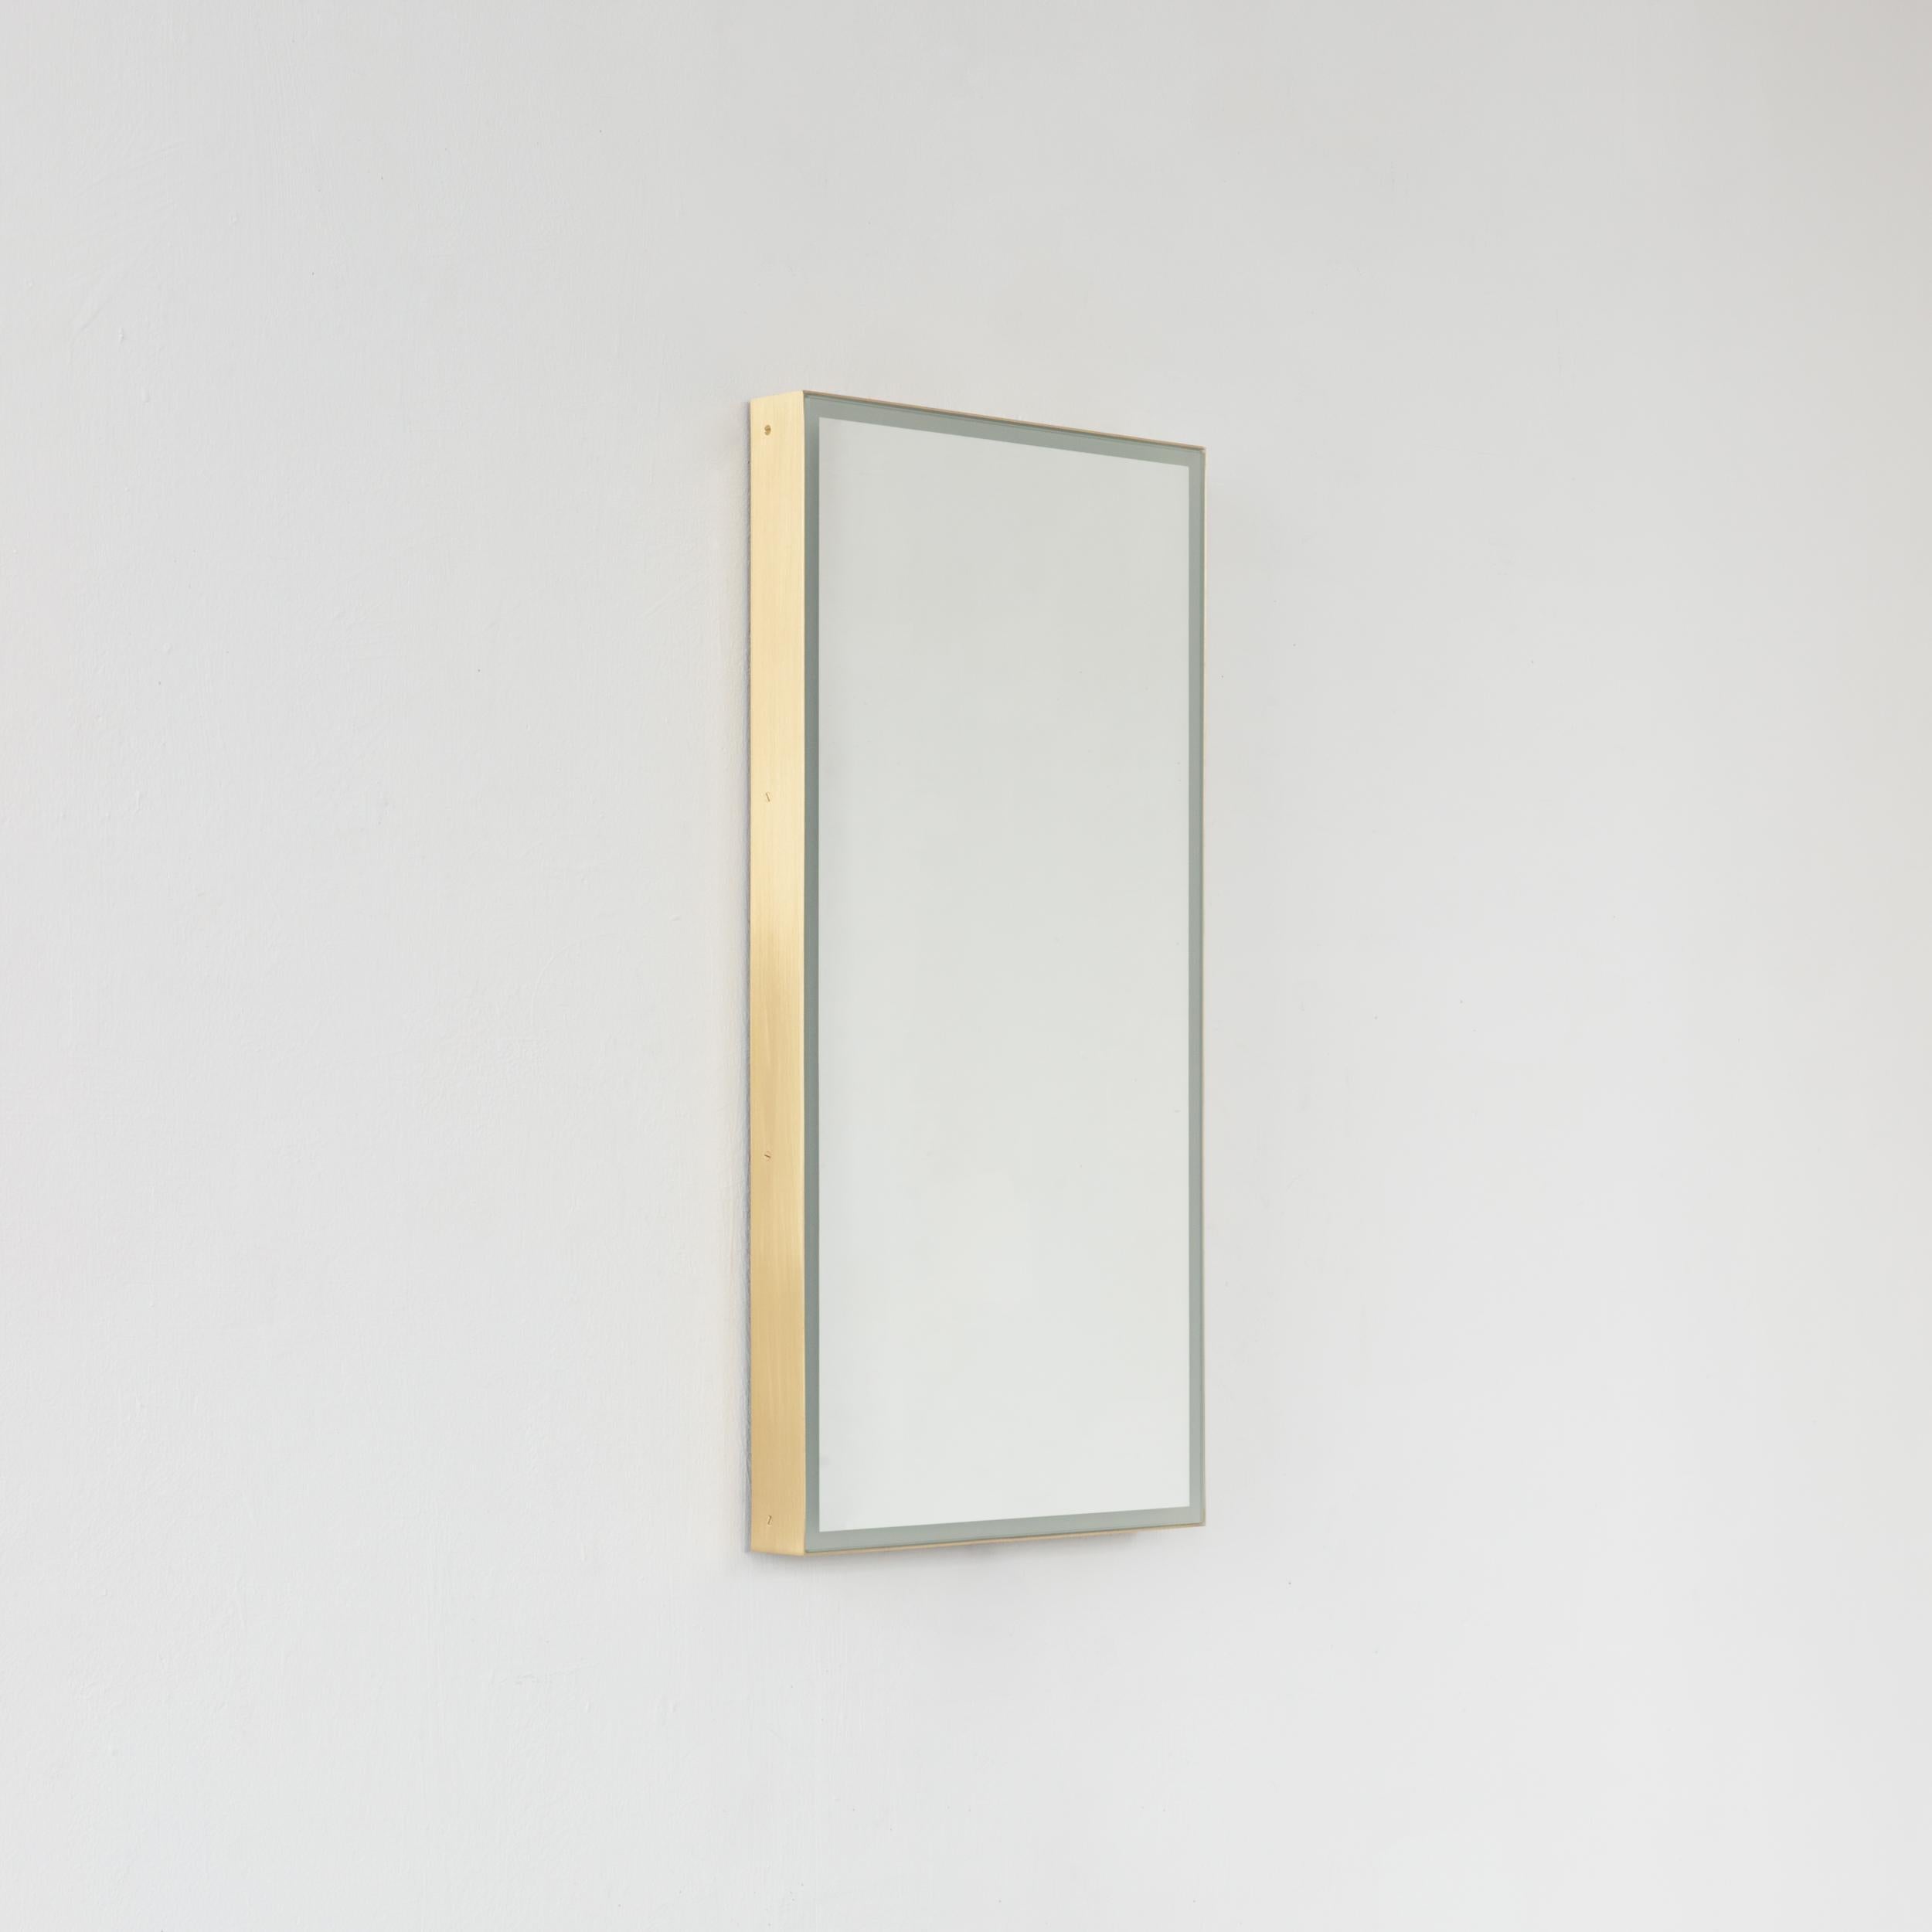 Brushed Quadris Rectangular Front Illuminated Modern Mirror with a Brass Frame, Small For Sale